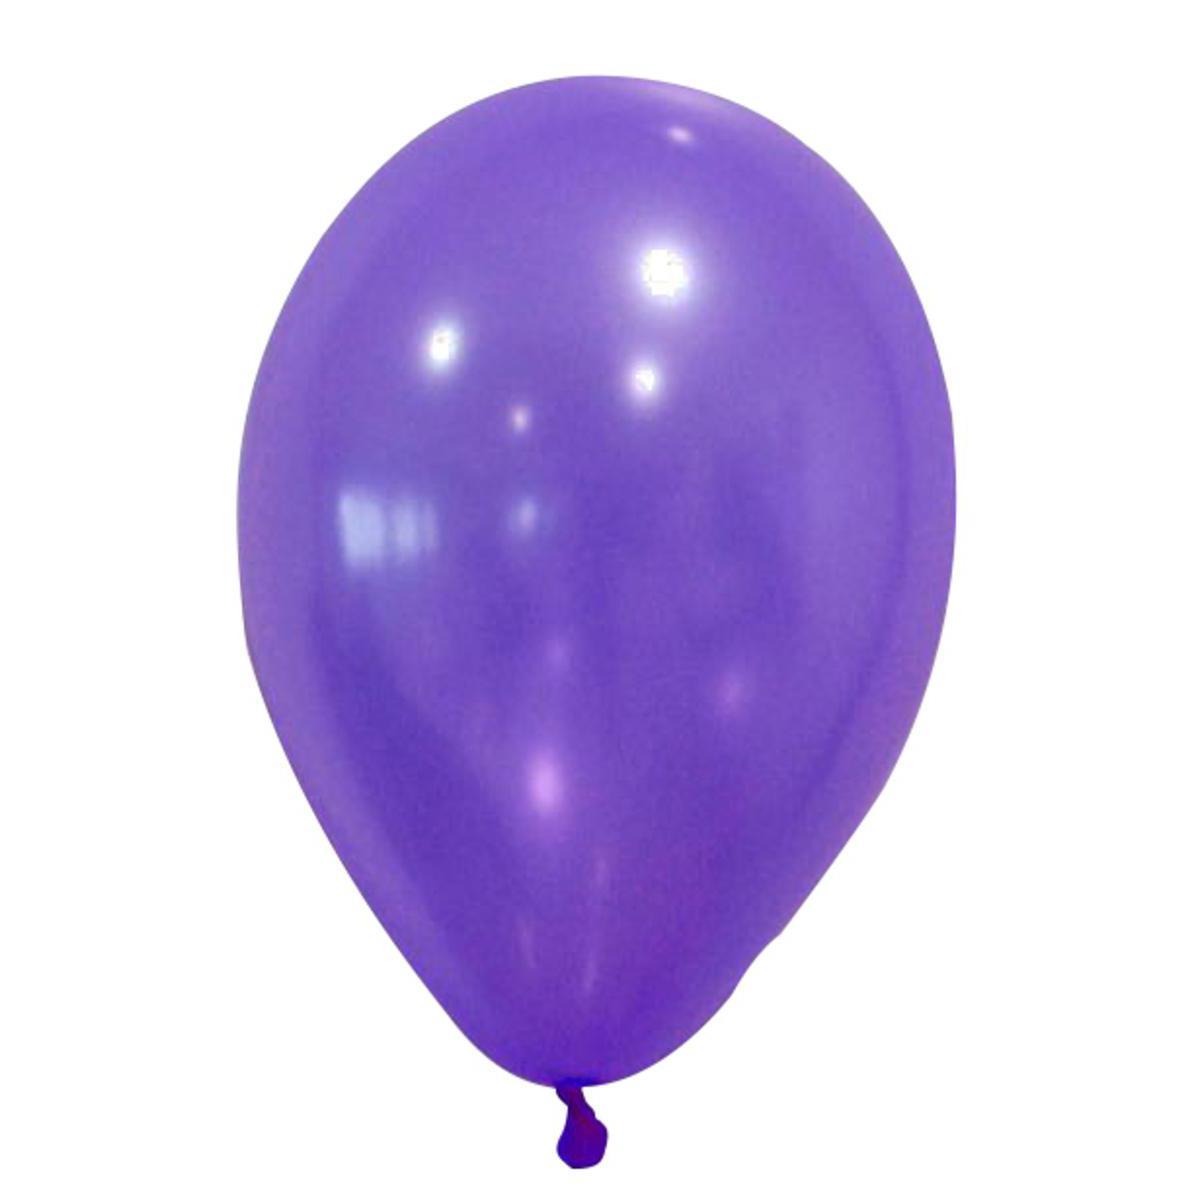 ballons nacres x24 - made in france 30cm - prune